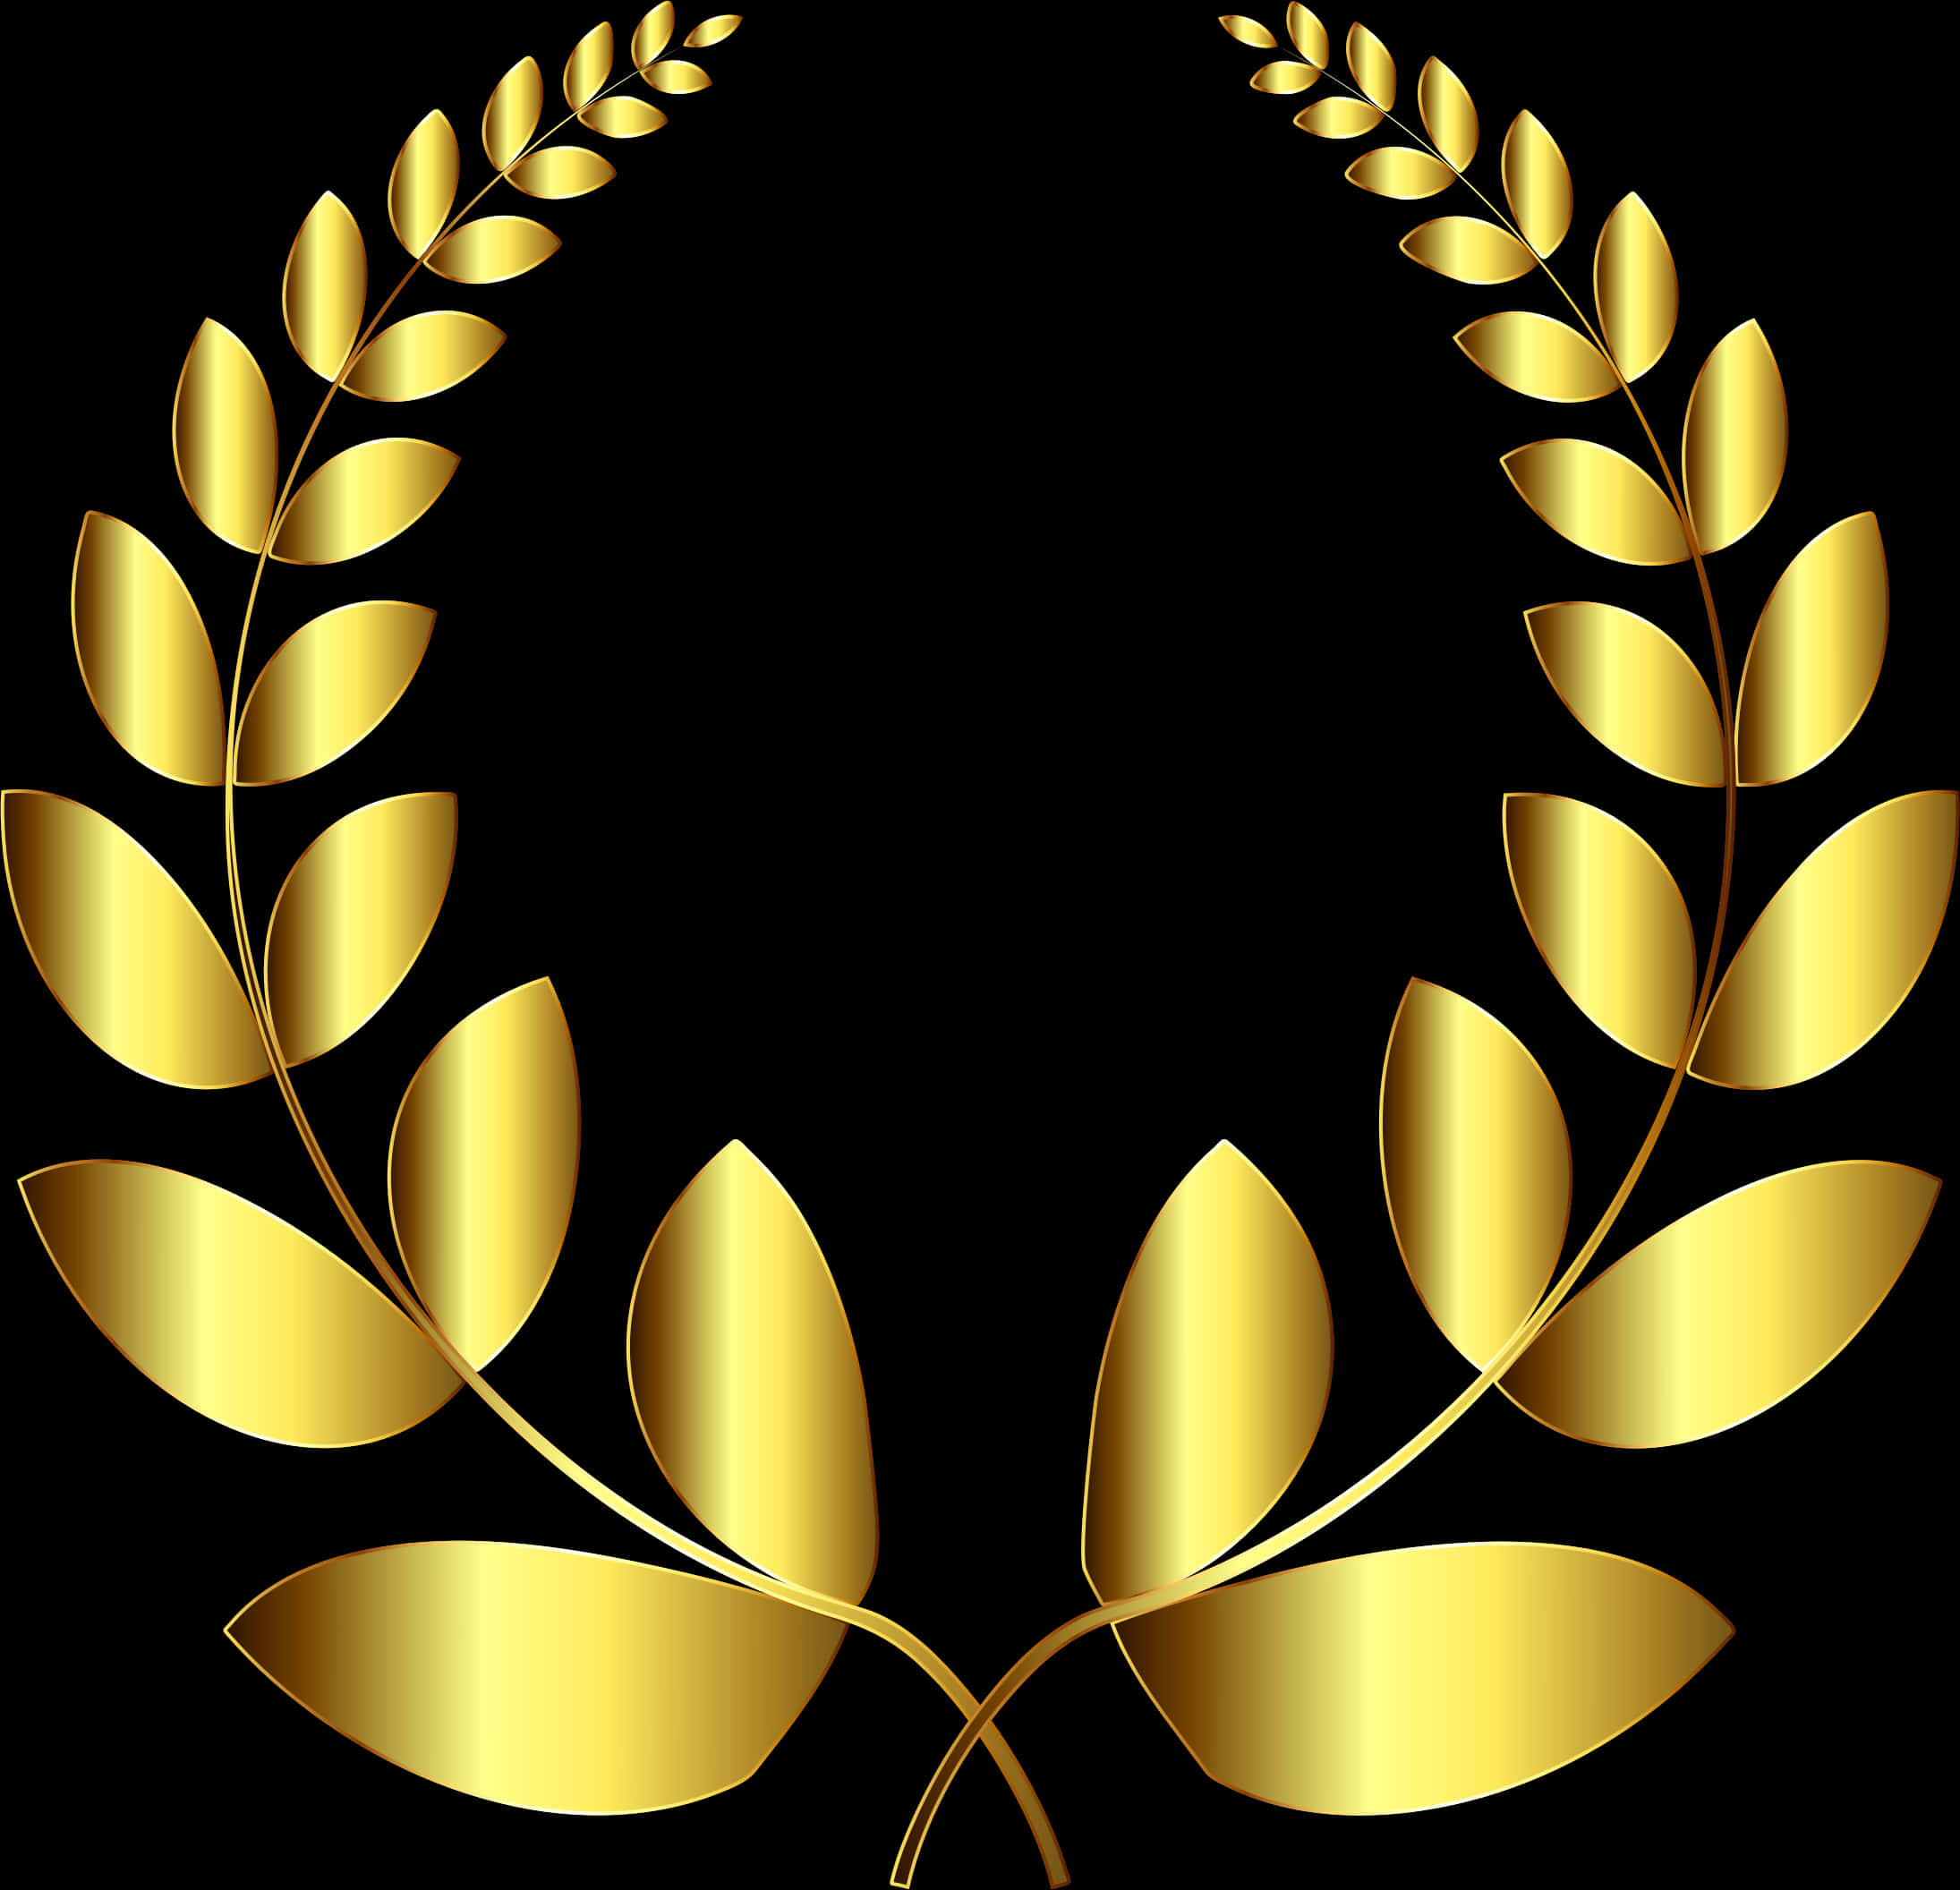 A Gold Laurel Wreath With Black Background